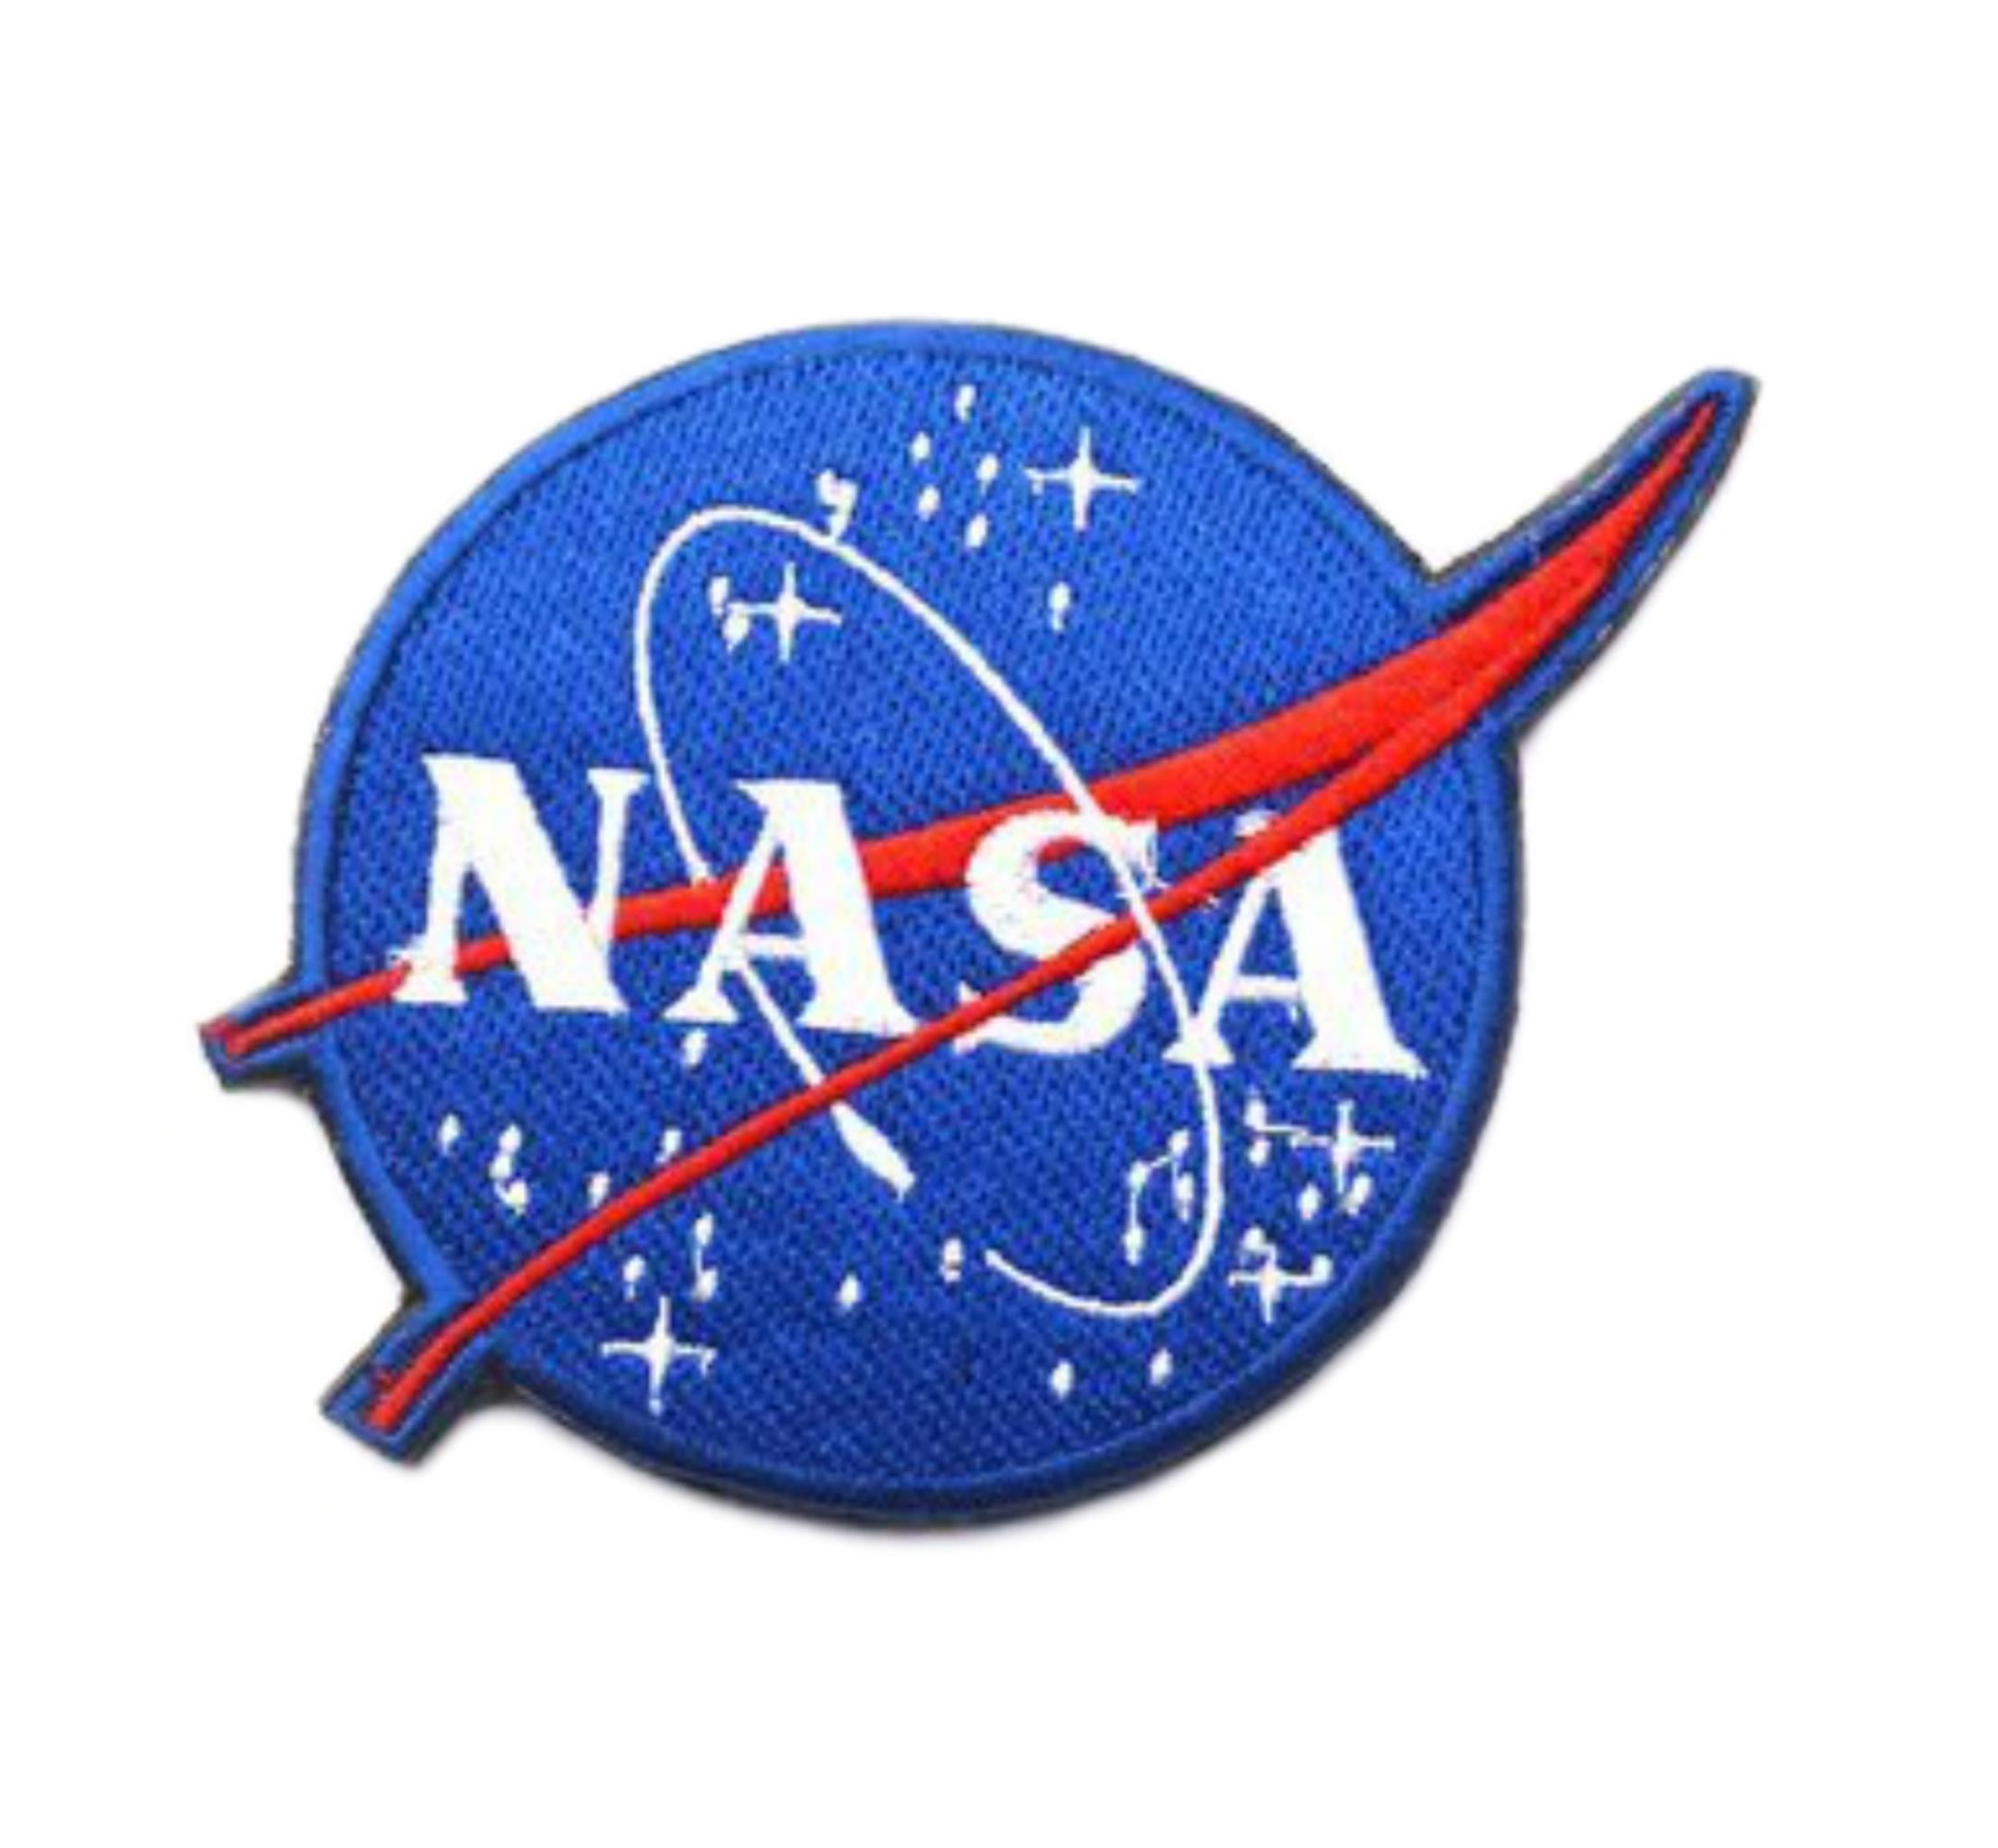 Rocket Patch Iron Sew On Cloth Space NASA Embroidered Badge Embroidery Applique 